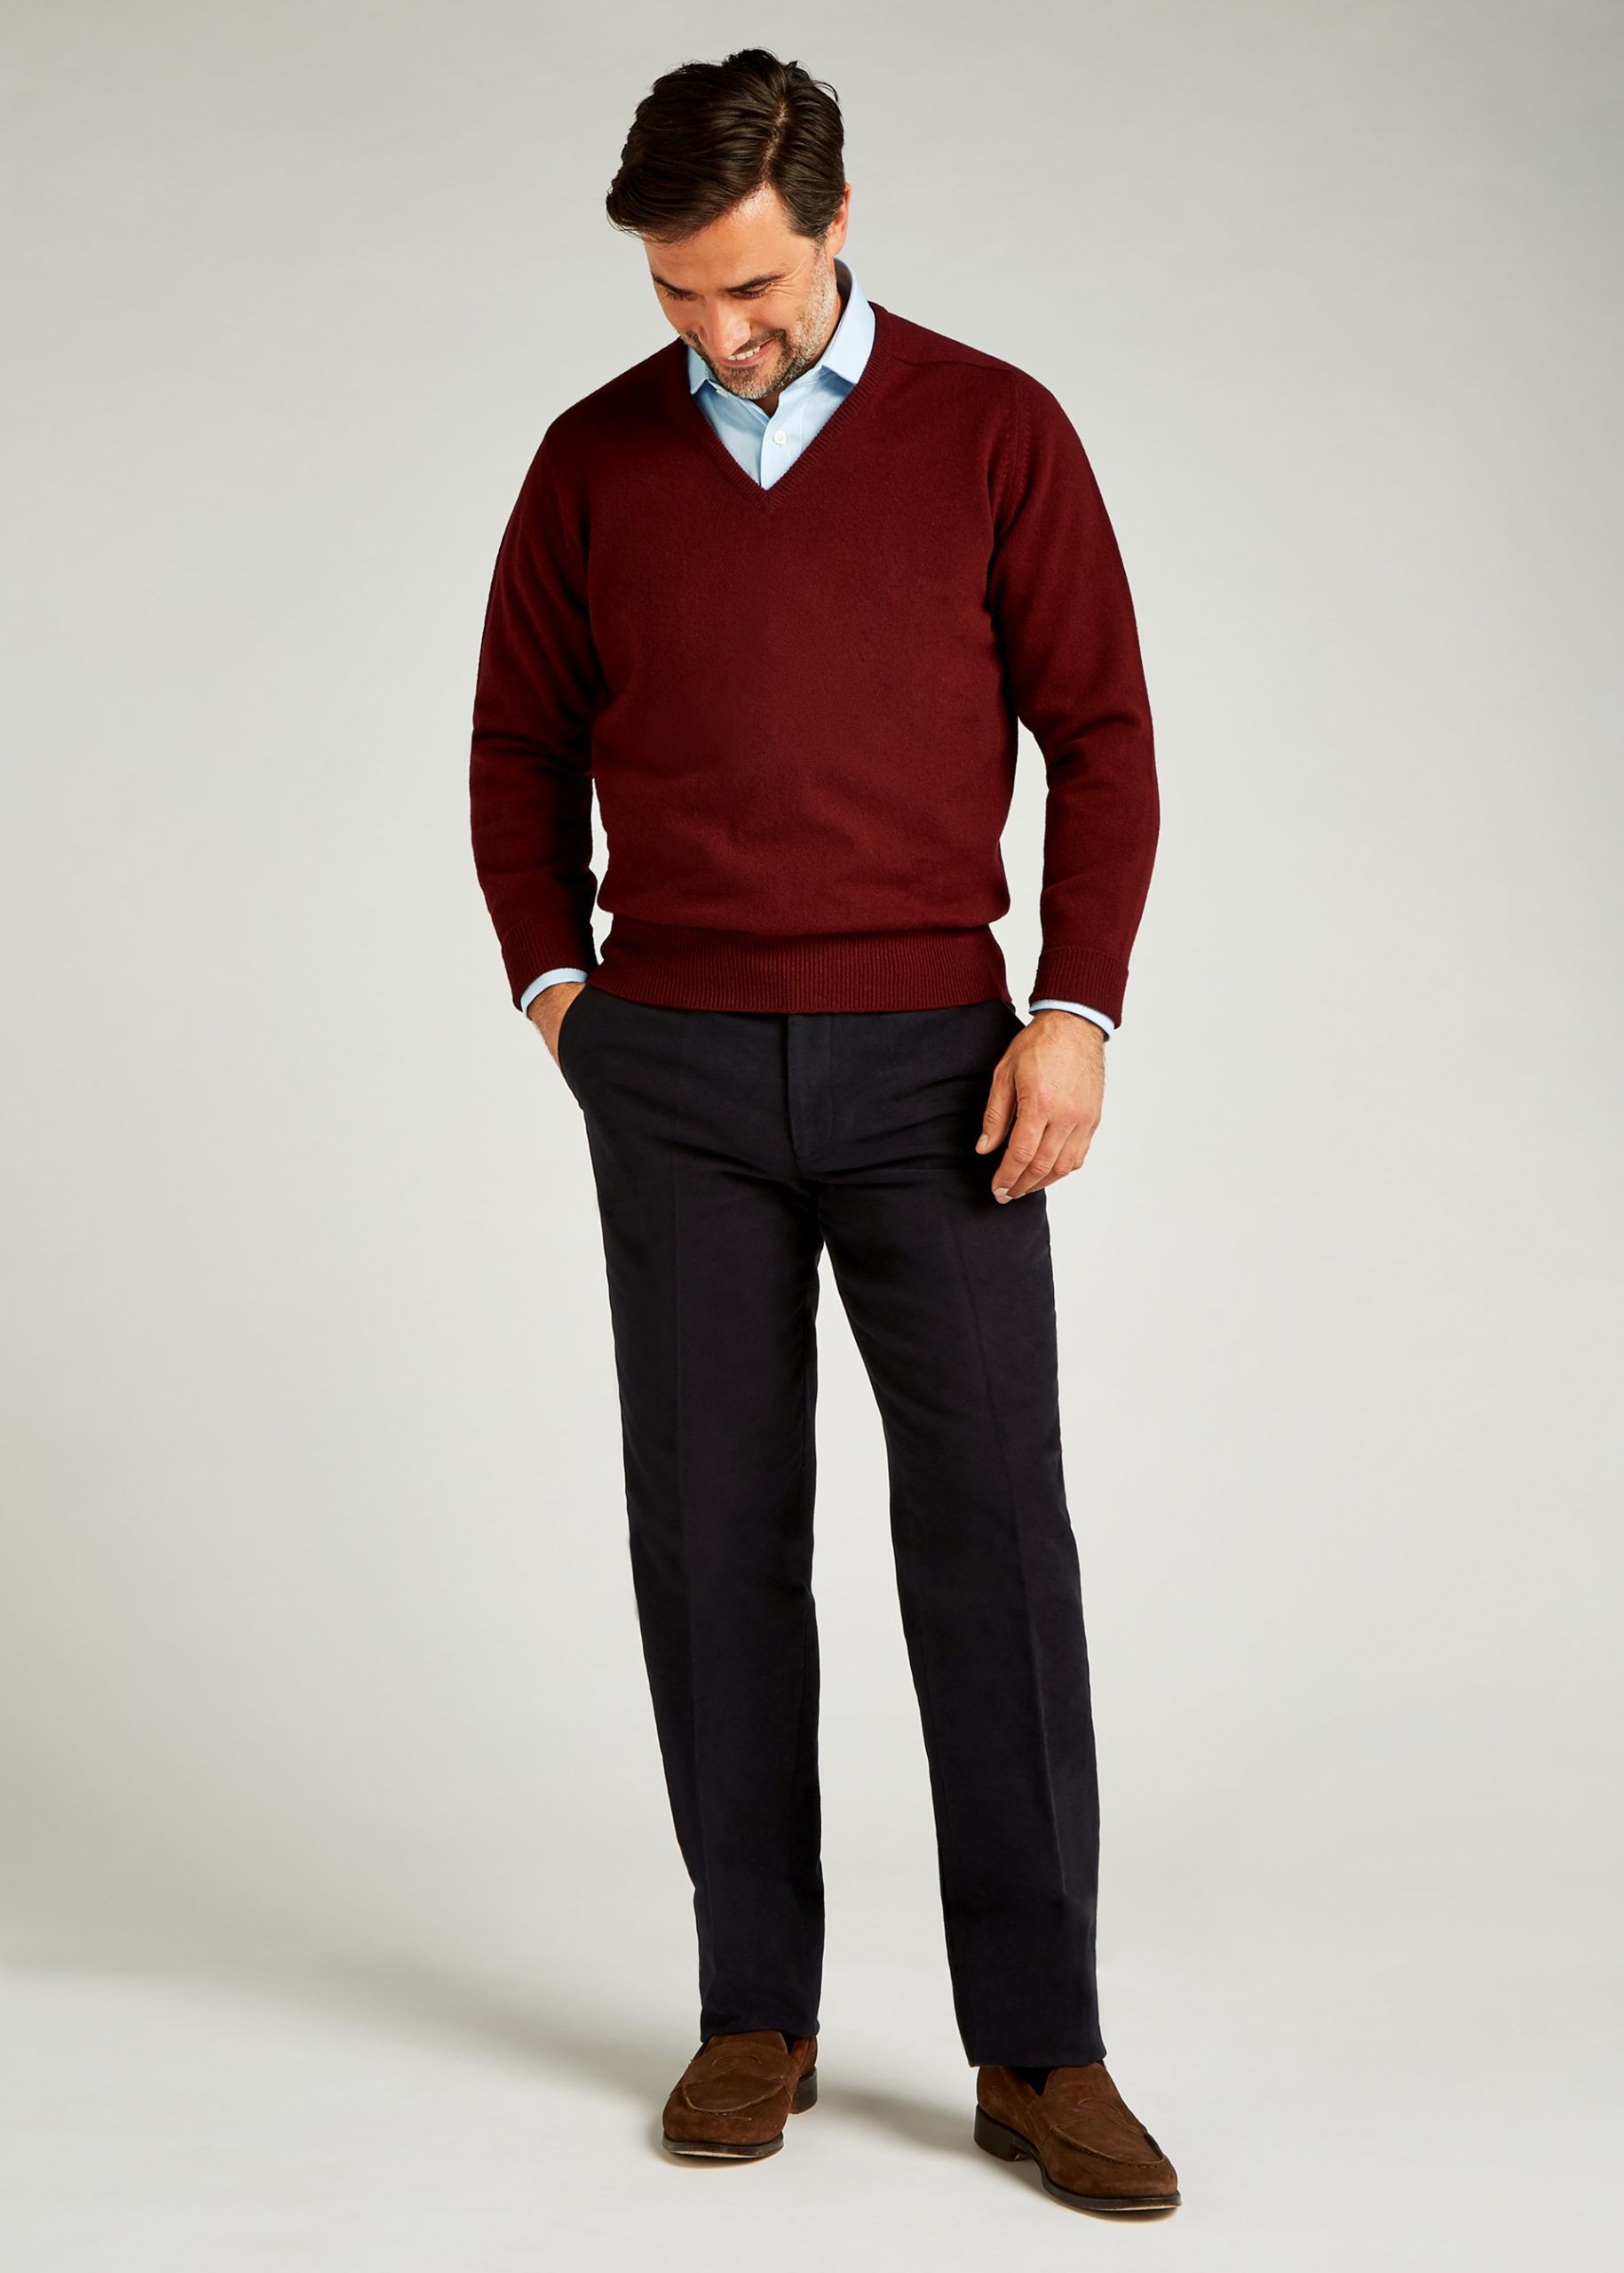 Roderick Charles Bordeaux wool sweater